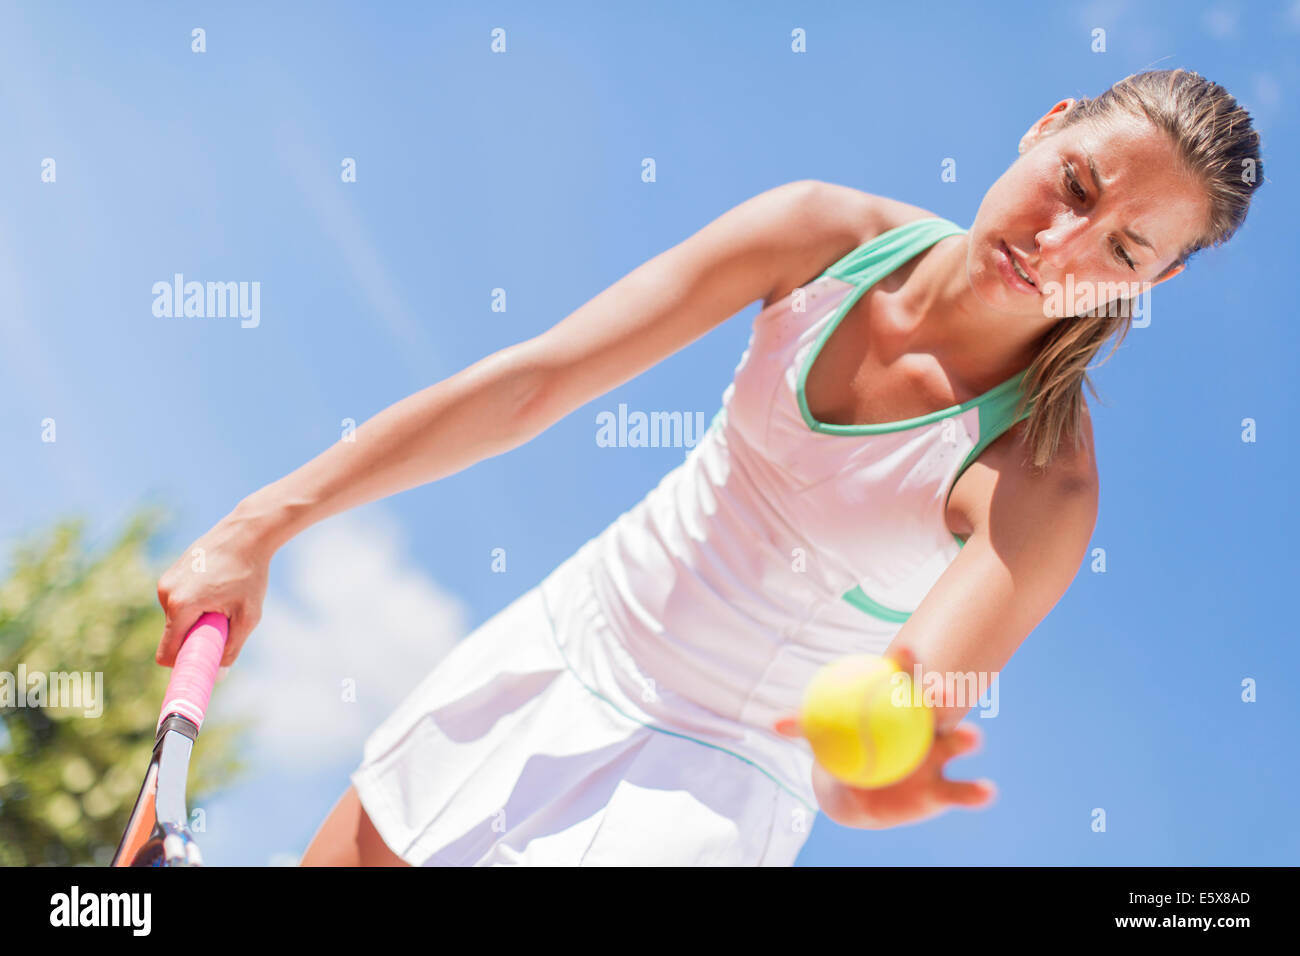 Young woman playing tennis Stock Photo